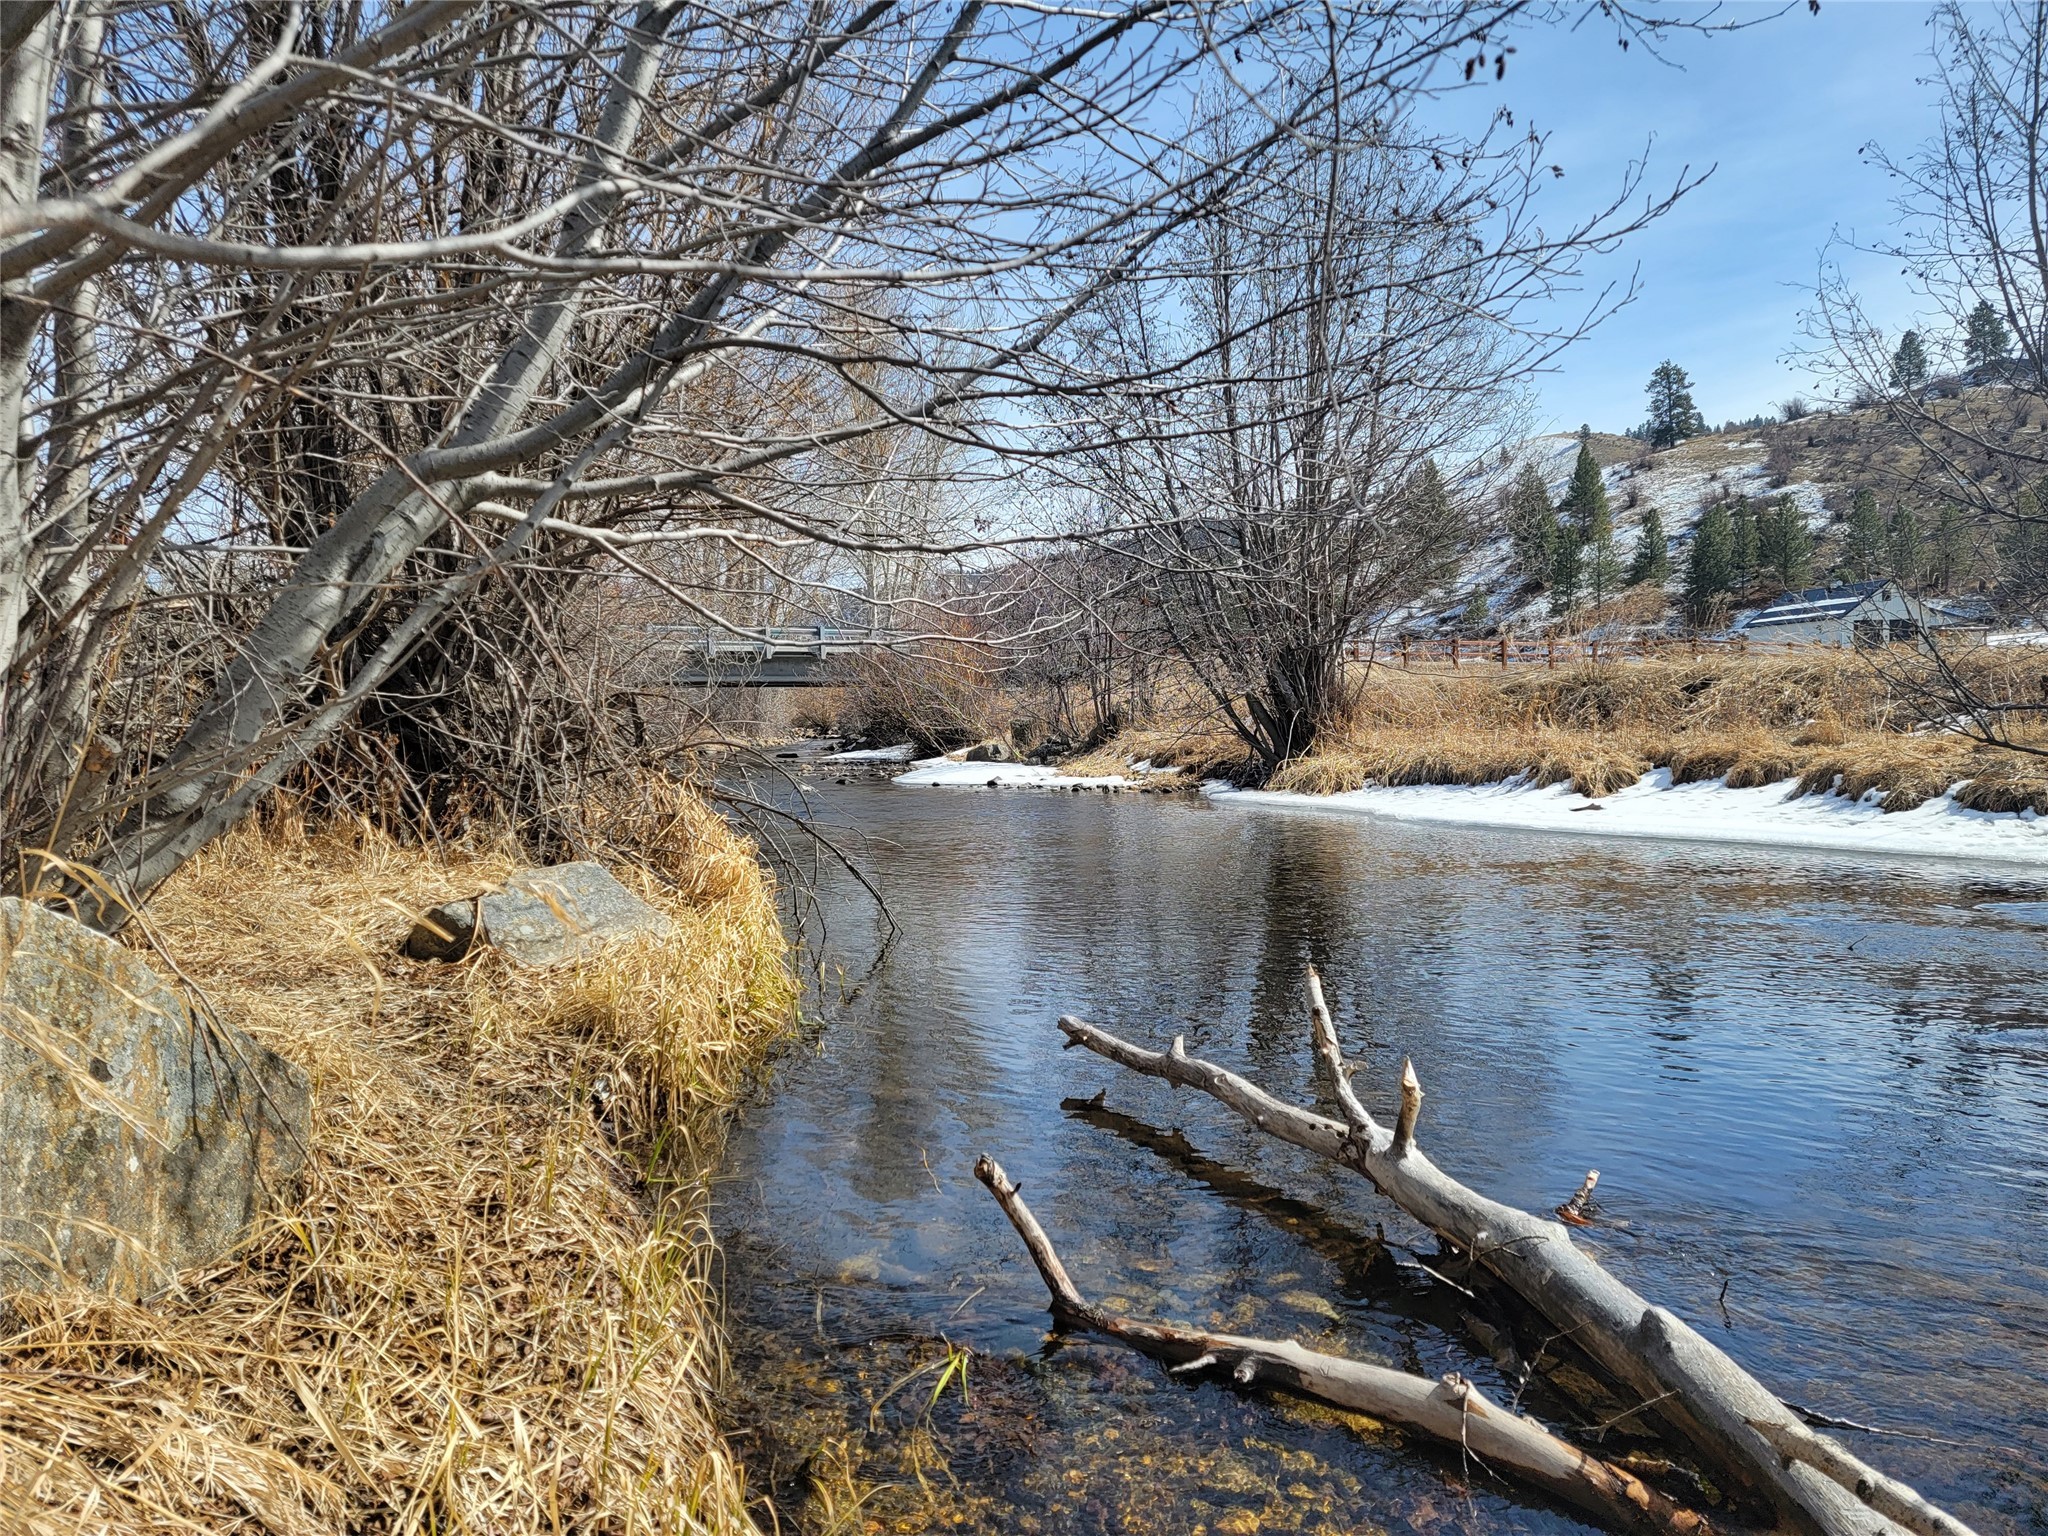 This property has everything you could ask for! Creek frontage, beautiful views, a large pond, and water rights. Build your dream home on this 8.47+/- acre parcel, just 15 minutes from Hamilton on paved roads. Please call Carleton Clifford at 406-369-0871 or your Real estate professional.